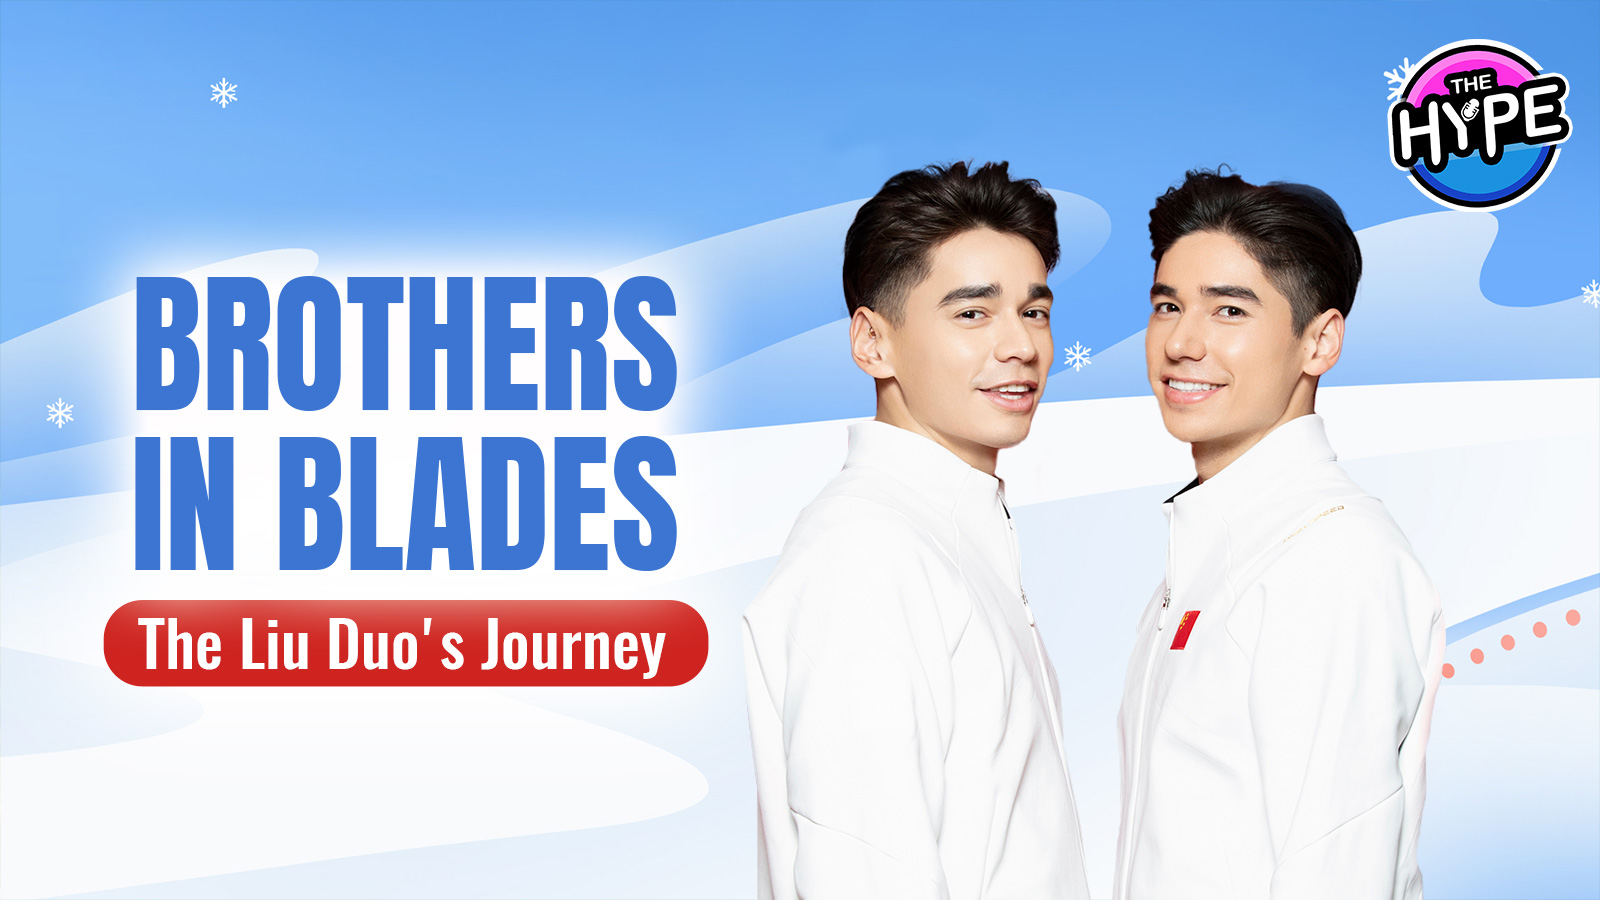 Watch: THE HYPE – Brothers in blades: The Liu duo's journey